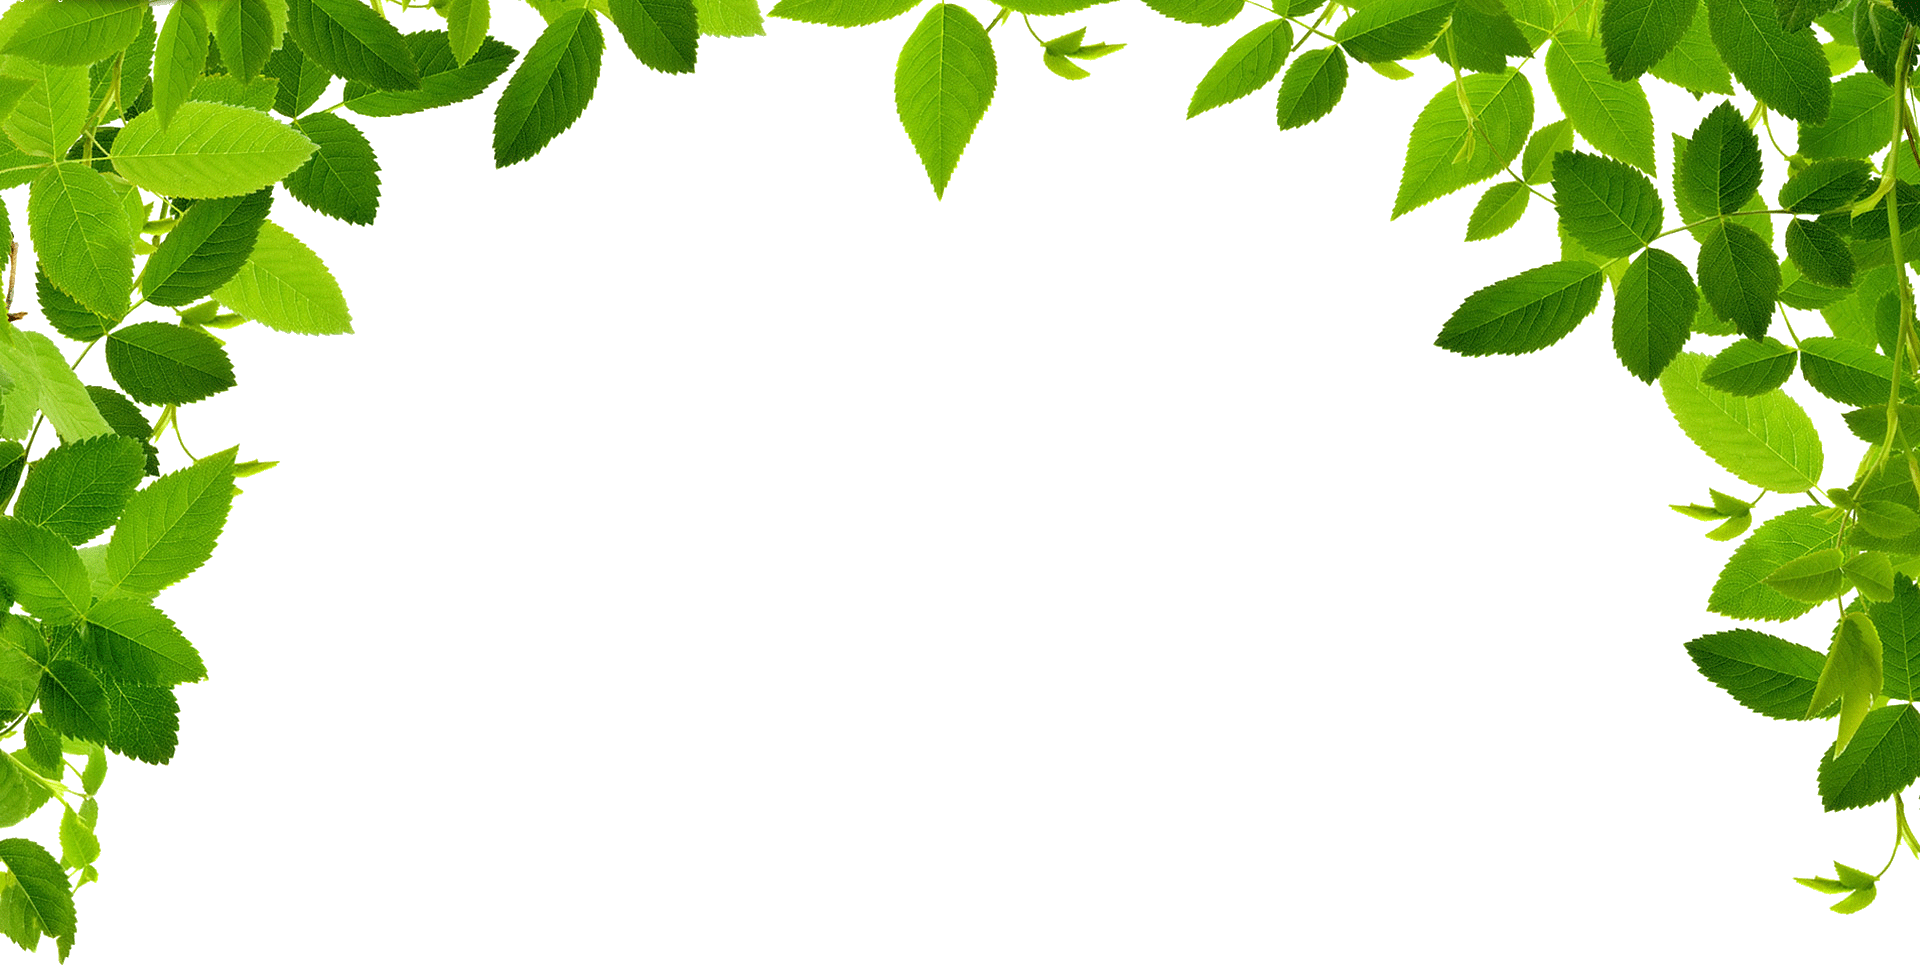 Clipart leaf boarder. Image a e bbd